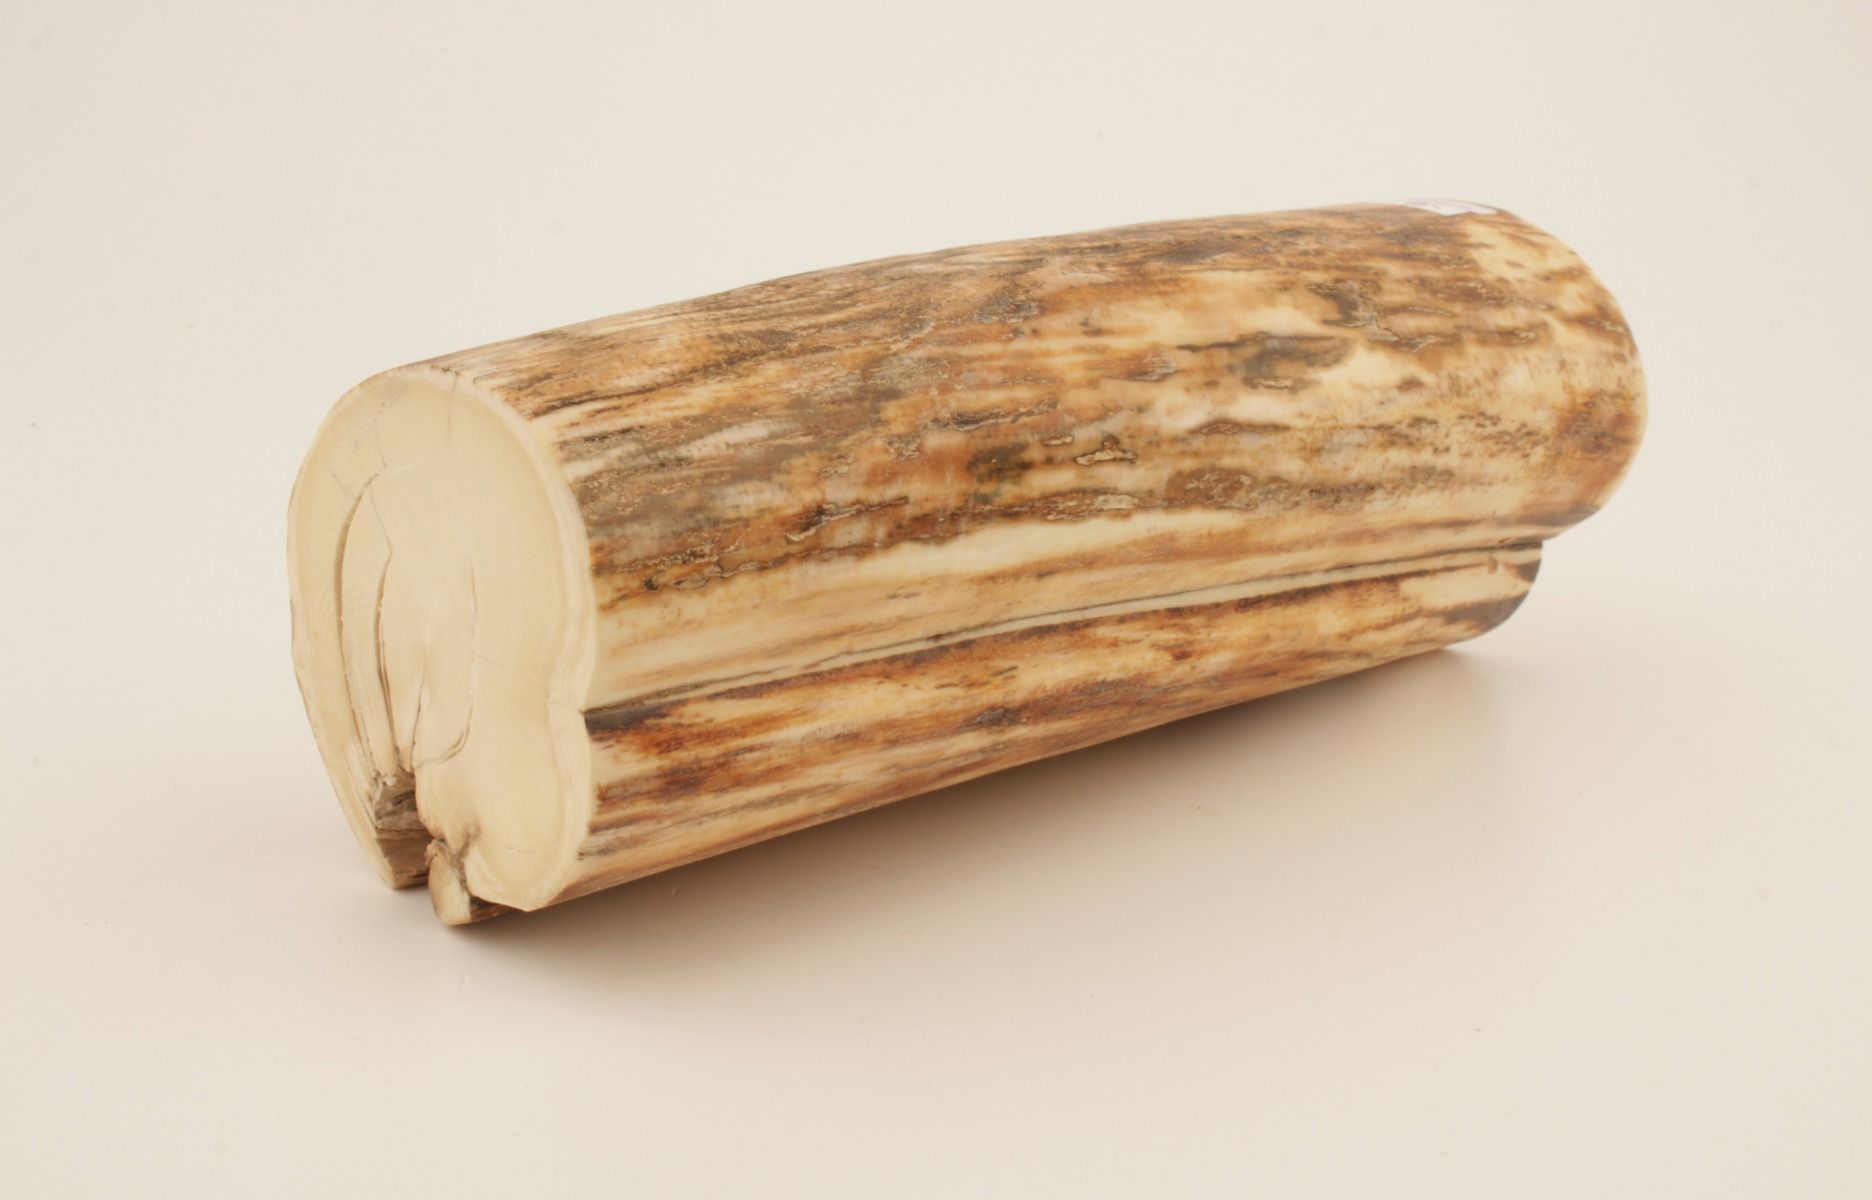 Natural woolly mammoth ivory